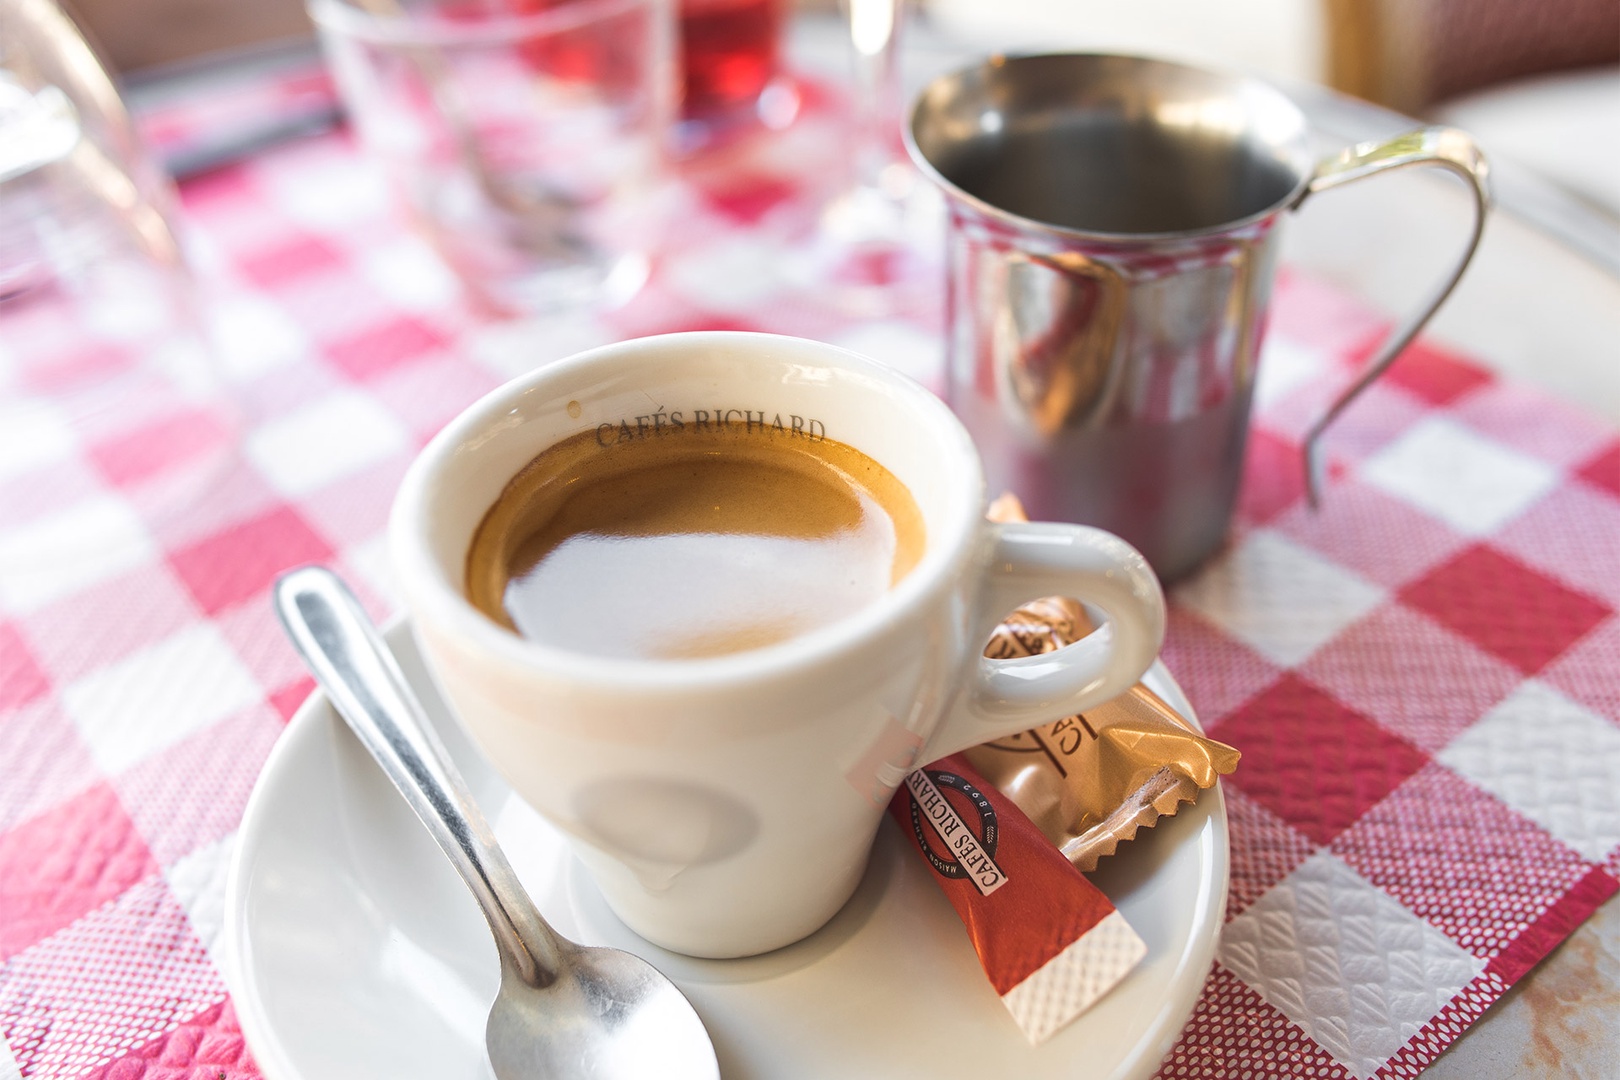 Sip an espresso at one of the local cafes.